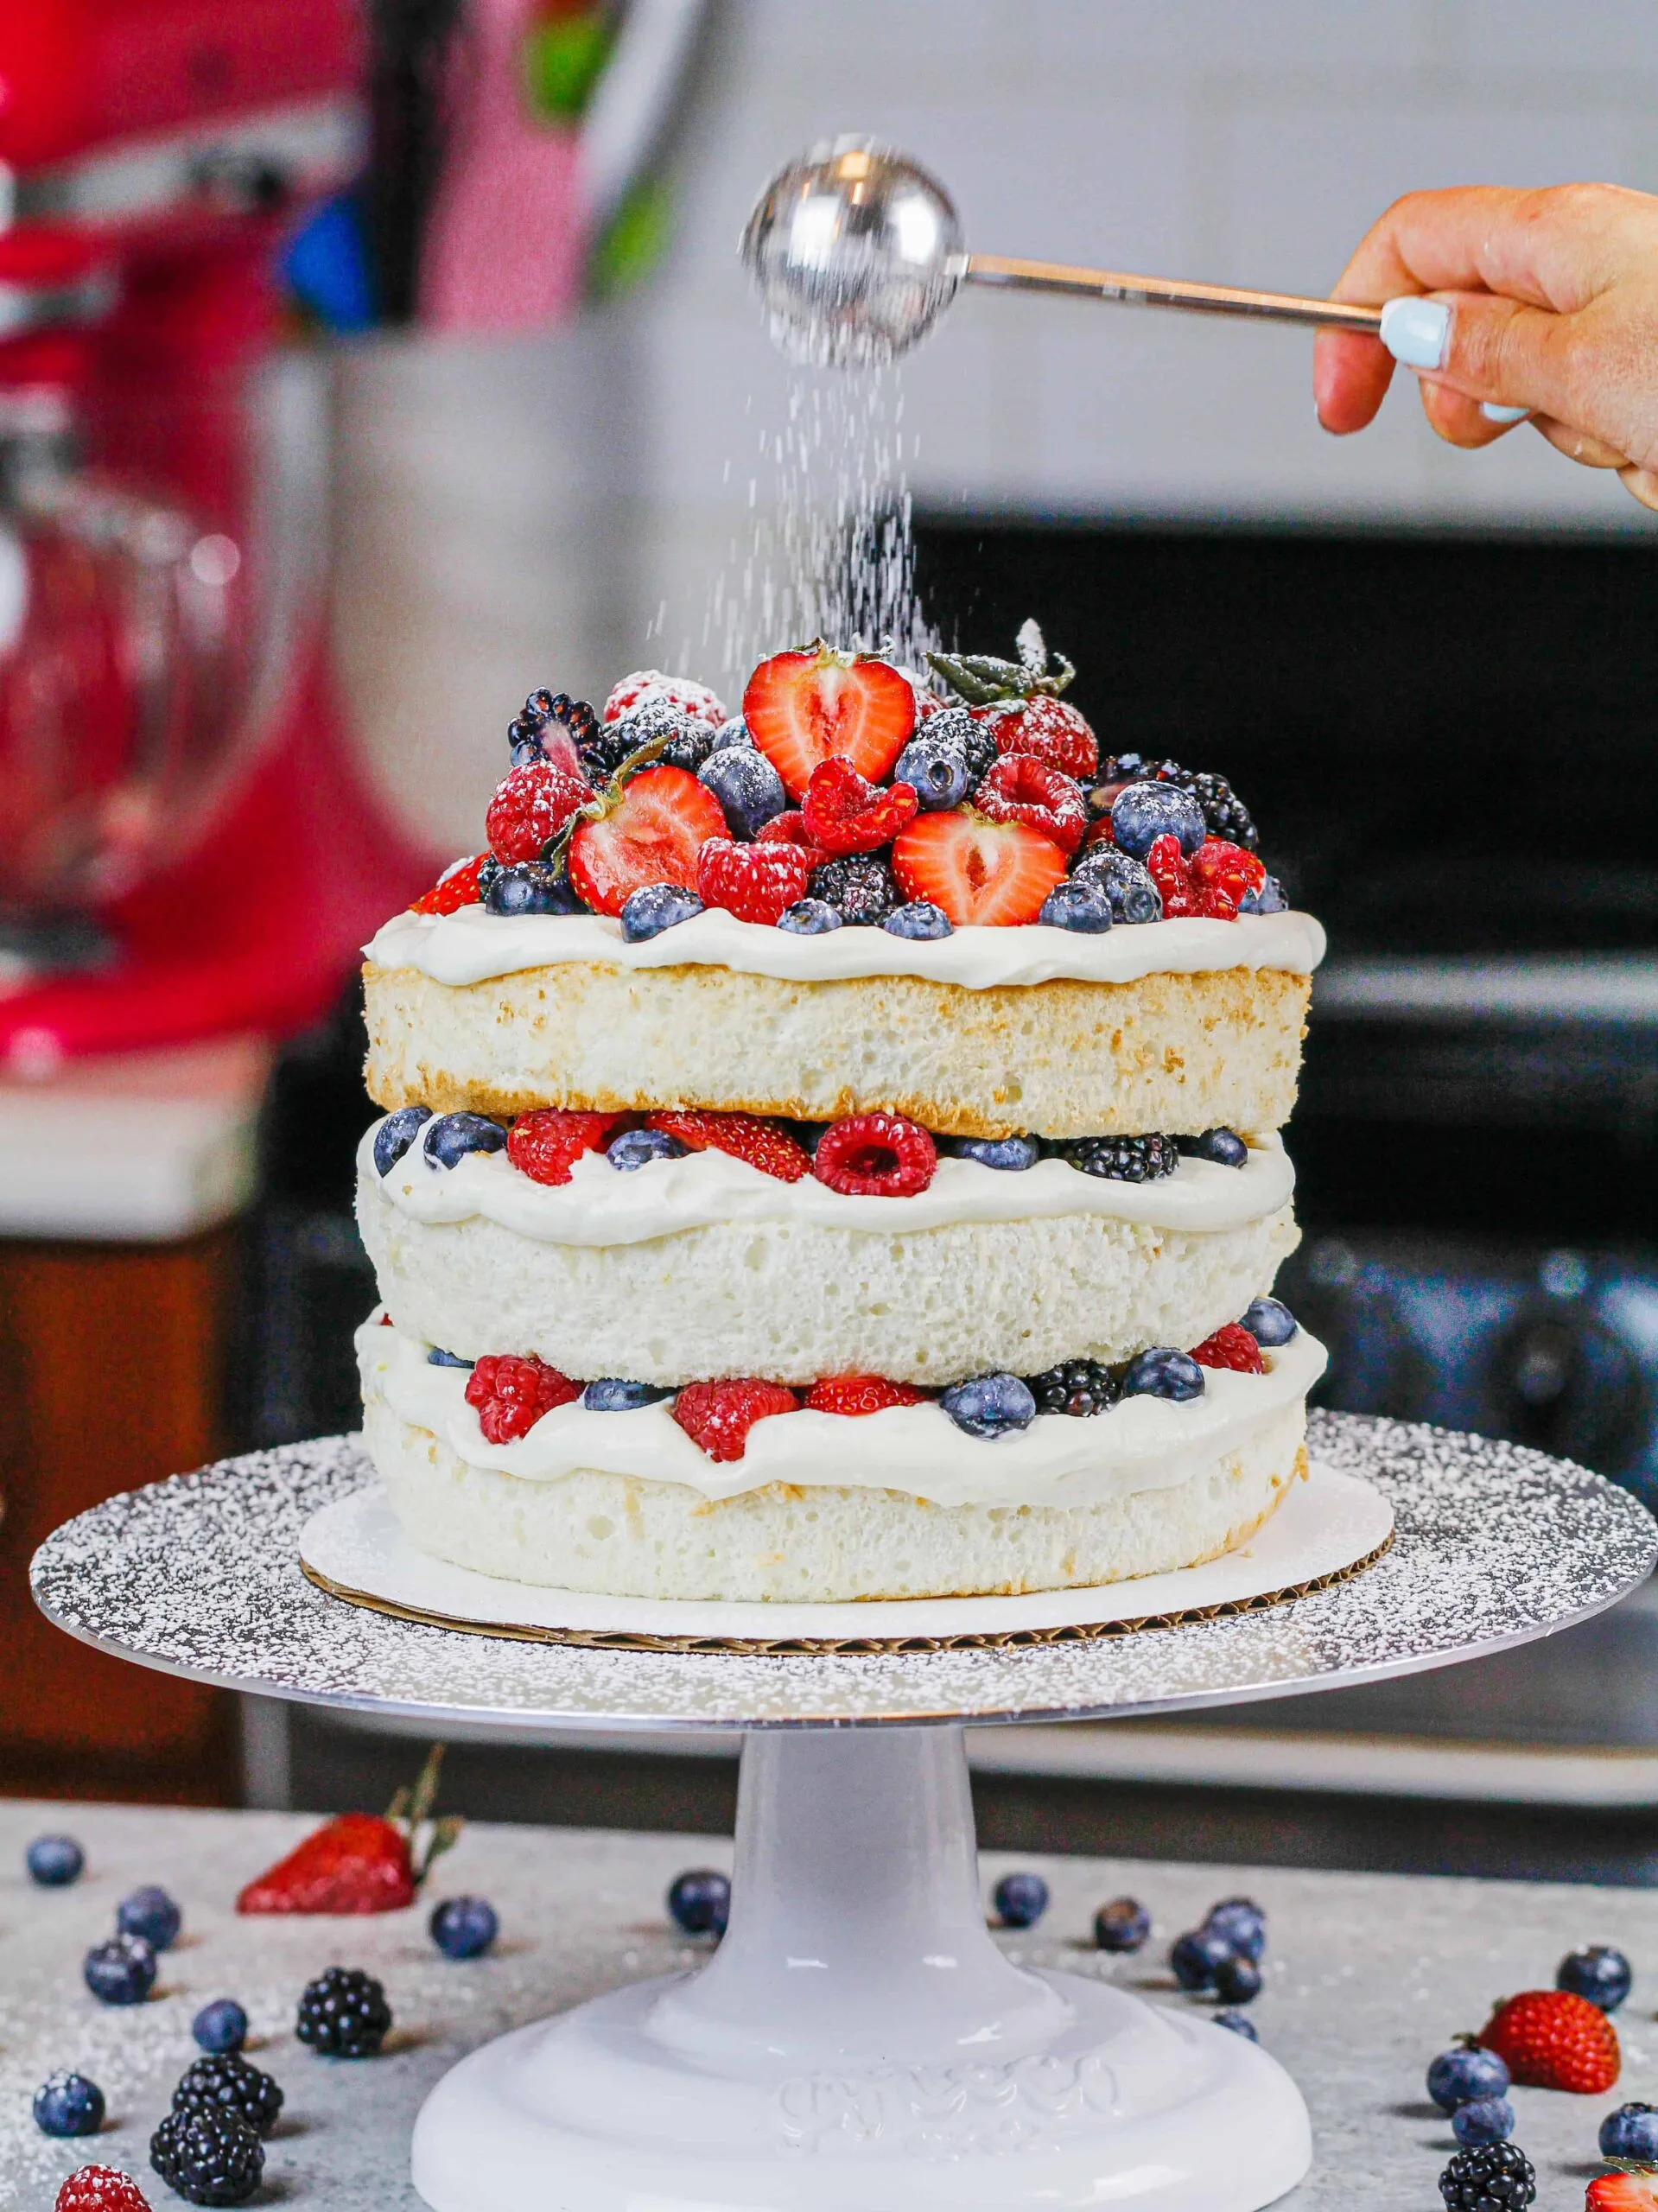 https://chelsweets.com/wp-content/uploads/2022/05/adding-powdered-sugar-to-top-of-cake-2-edited-scaled.jpg.webp